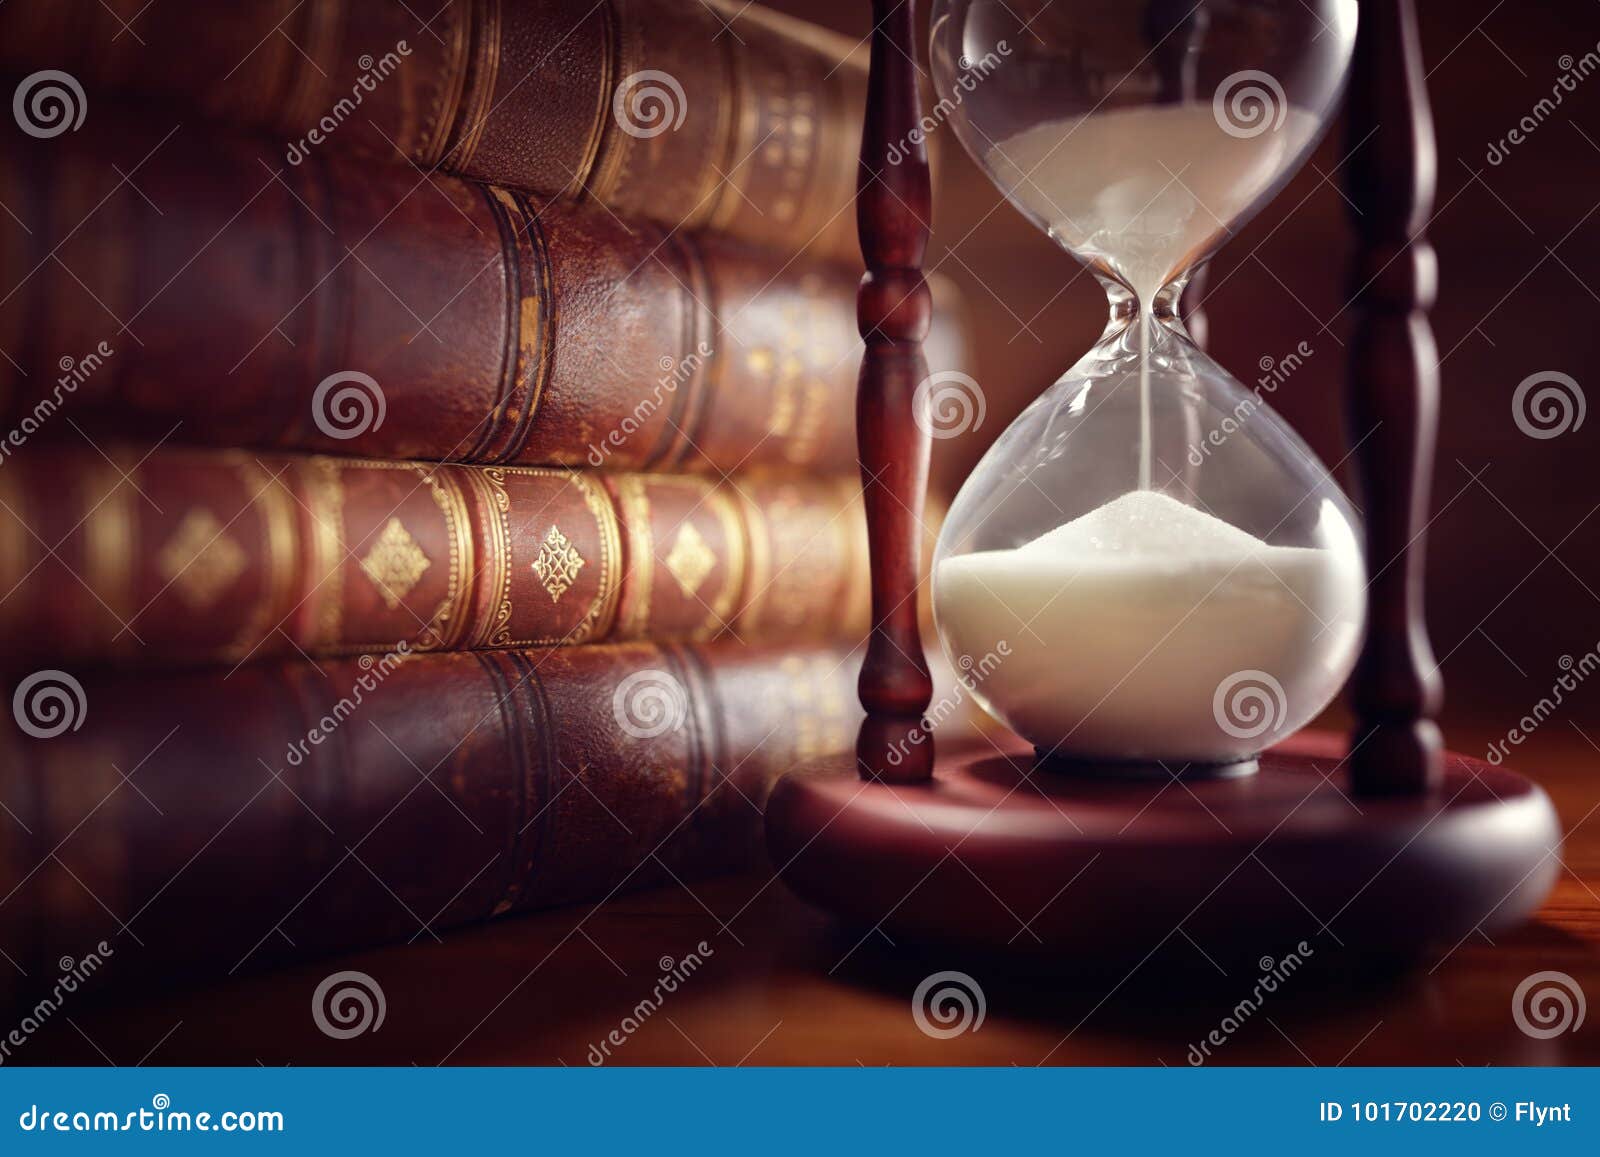 old books and hourglass